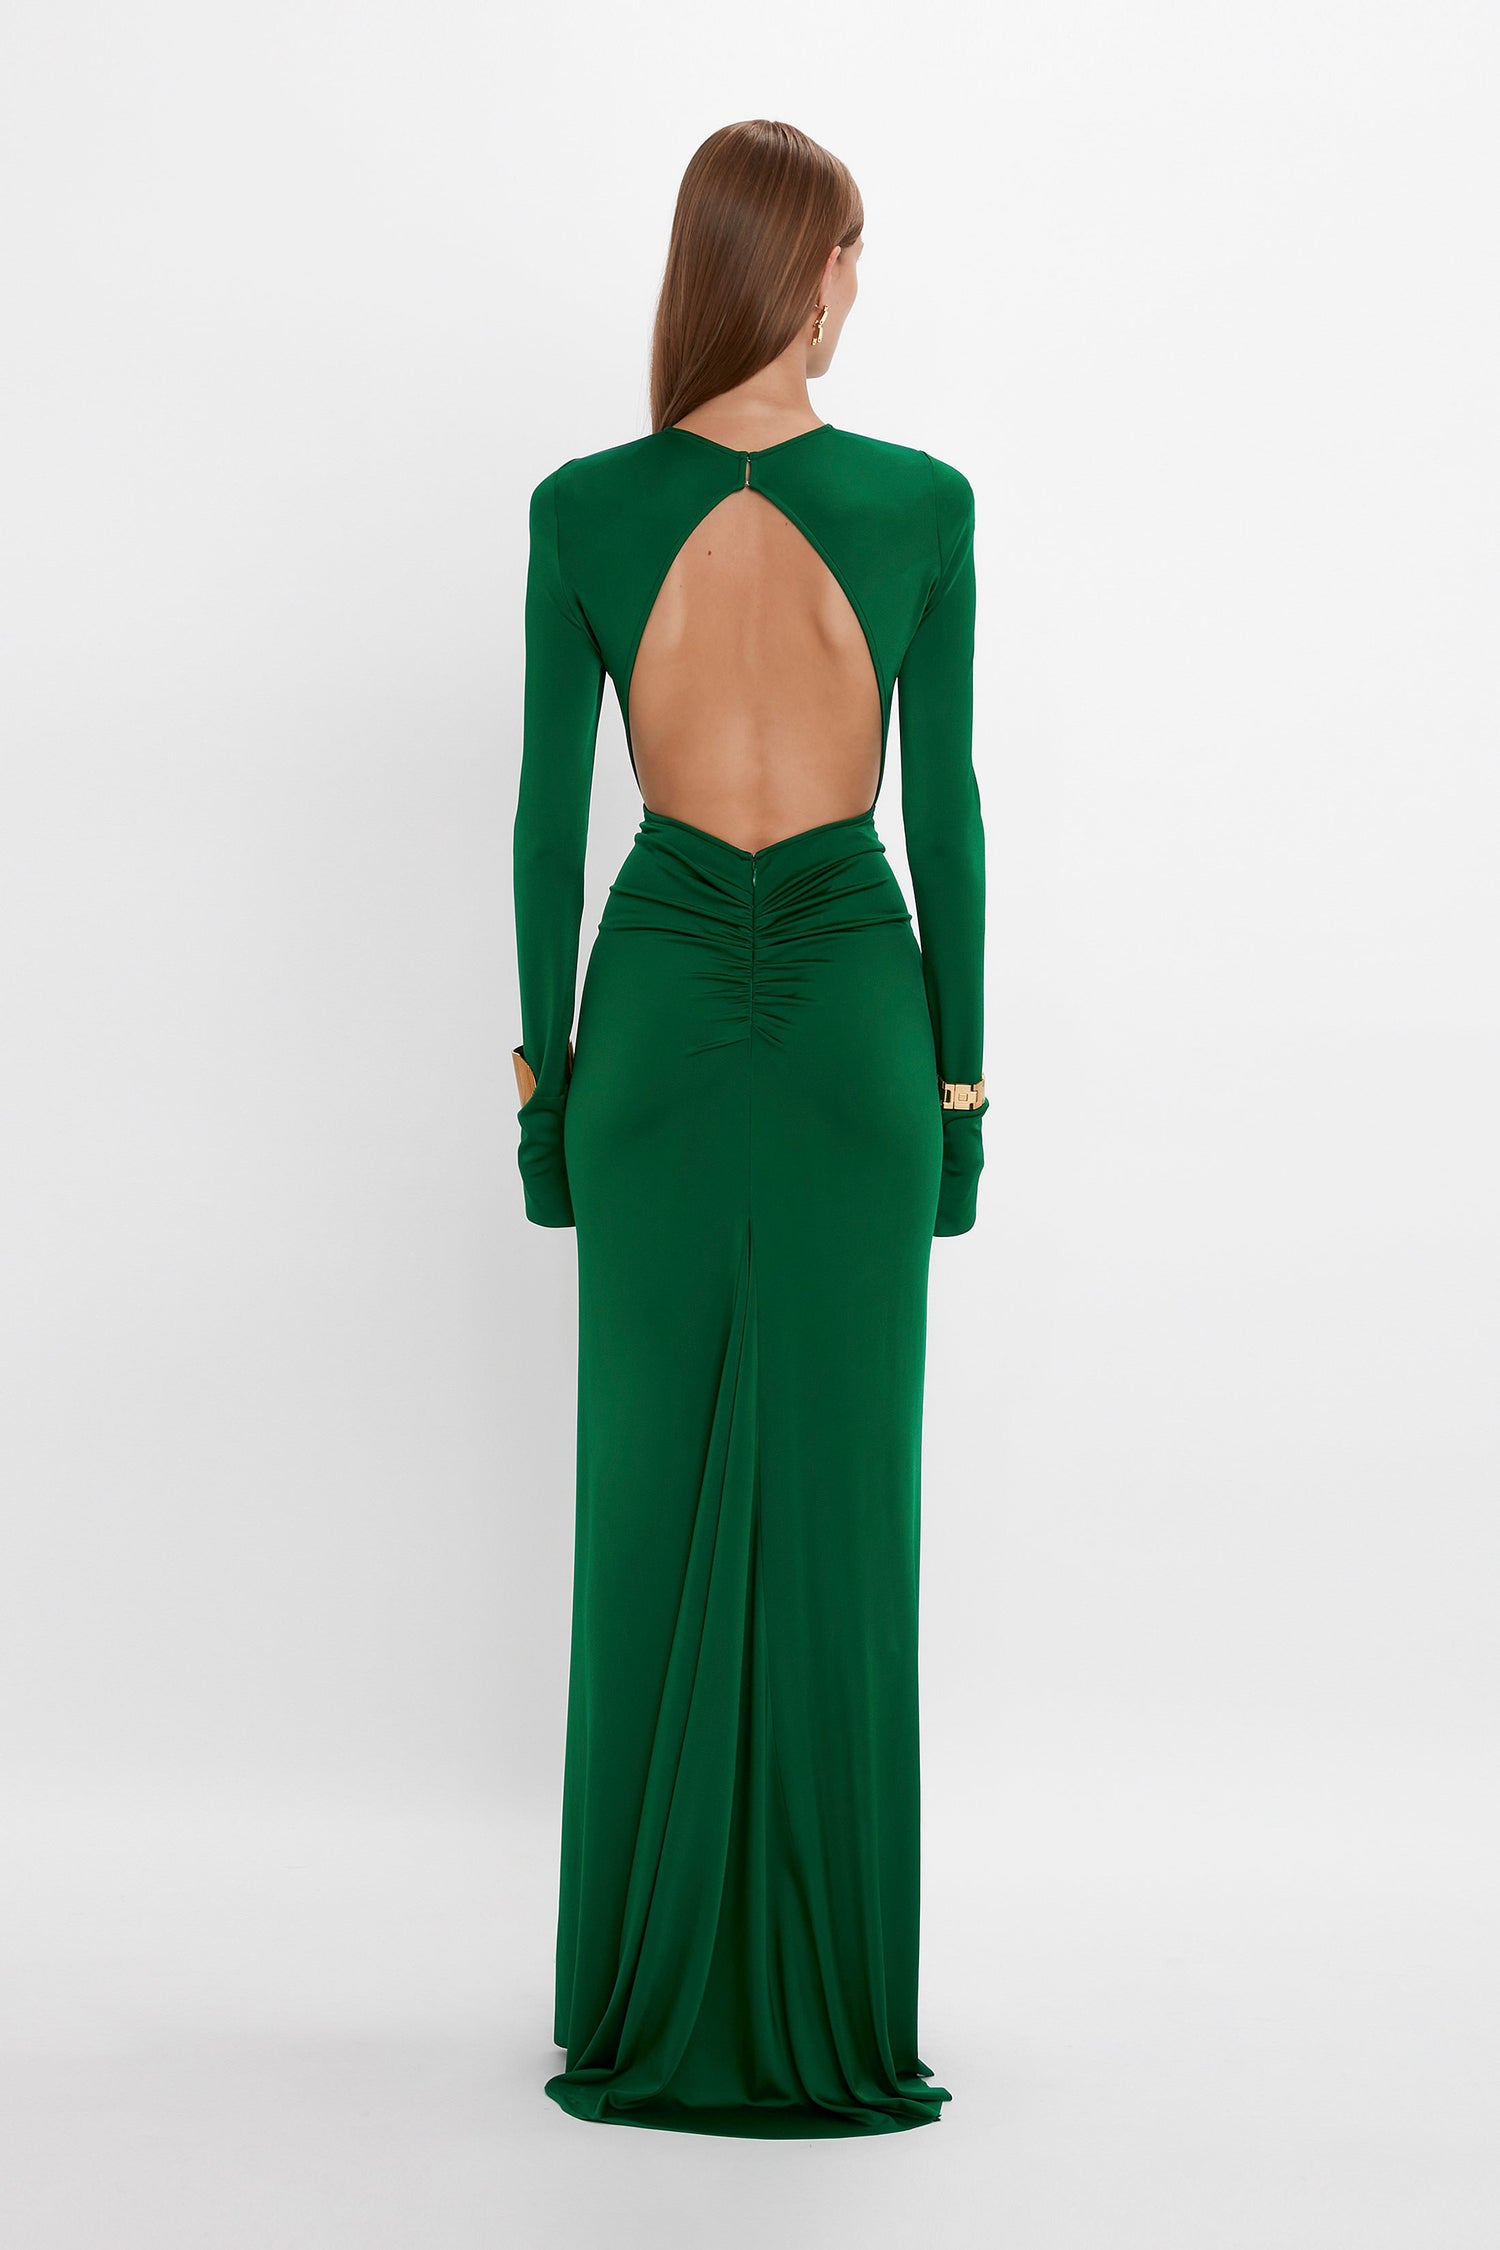 A woman stands facing away, wearing the Circle Detail Open Back Gown In Emerald by Victoria Beckham. Her hair is straight and falls down her back. The longer-length hem gathers at the lower back and extends to the floor, showcasing a body-sculpting jersey that enhances her silhouette effortlessly.